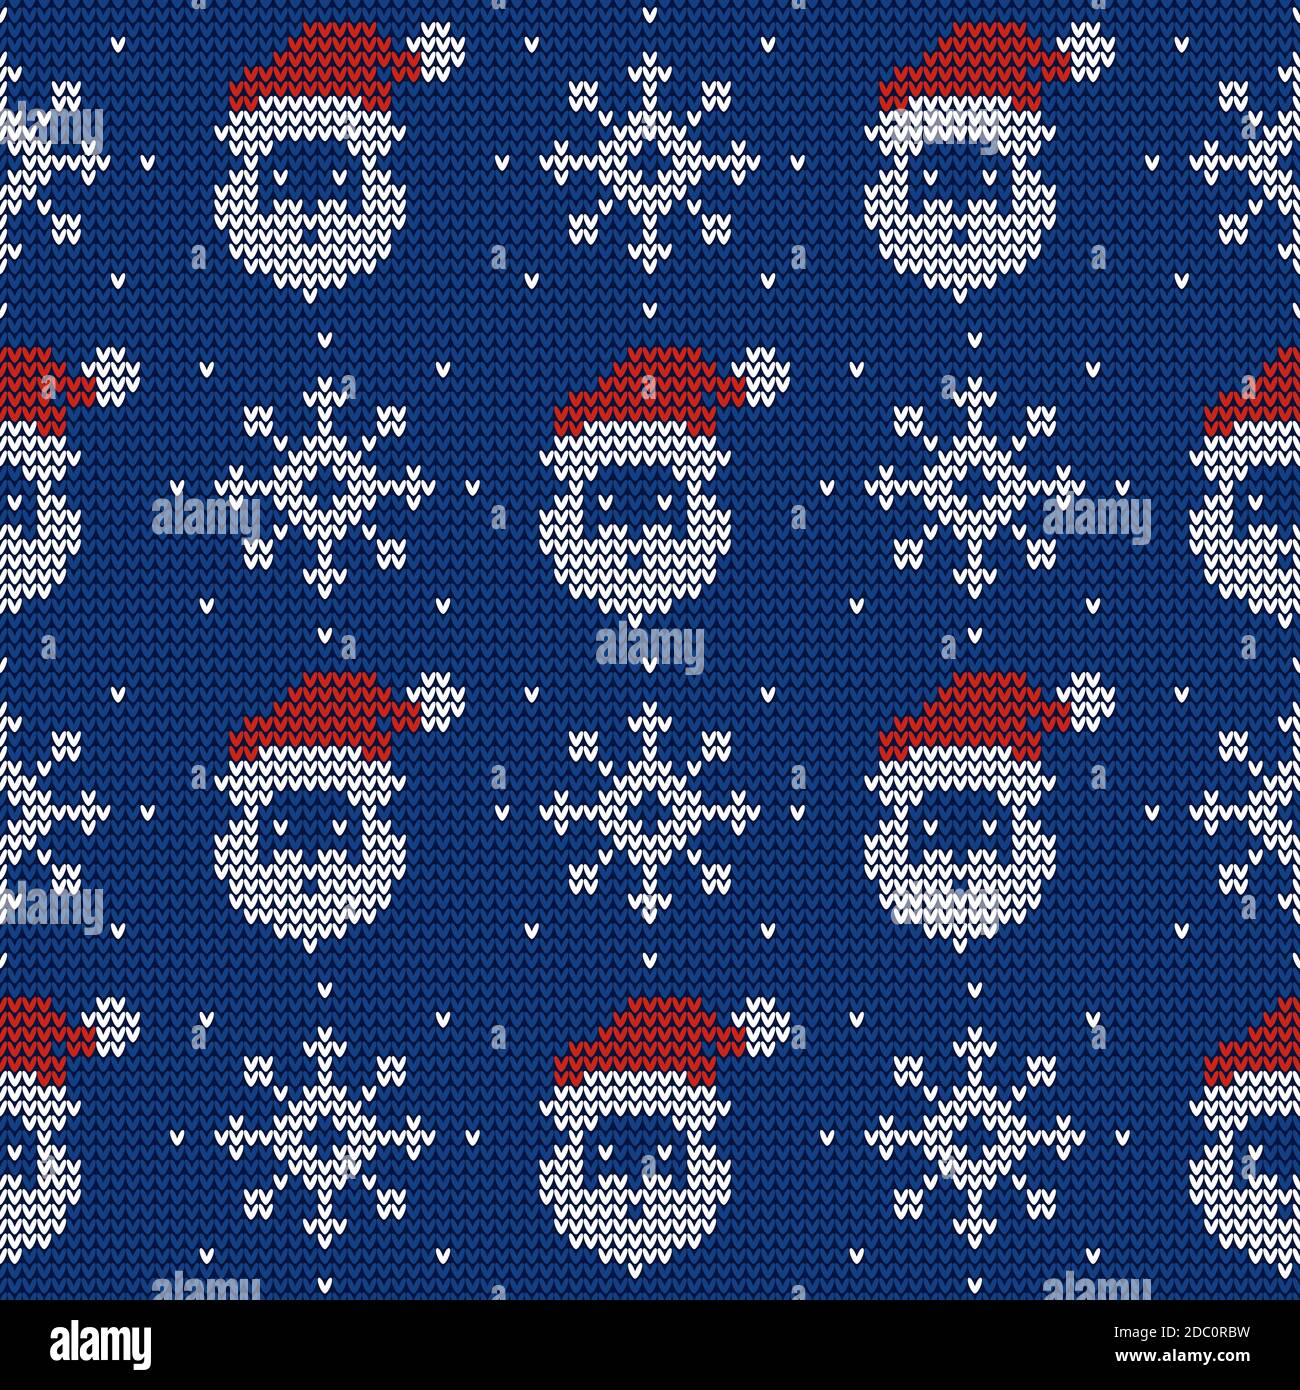 Knitted seamless pattern with Santa Clauses and snowflakes. Vector background. Blue, red and white sweater ornament. Stock Vector